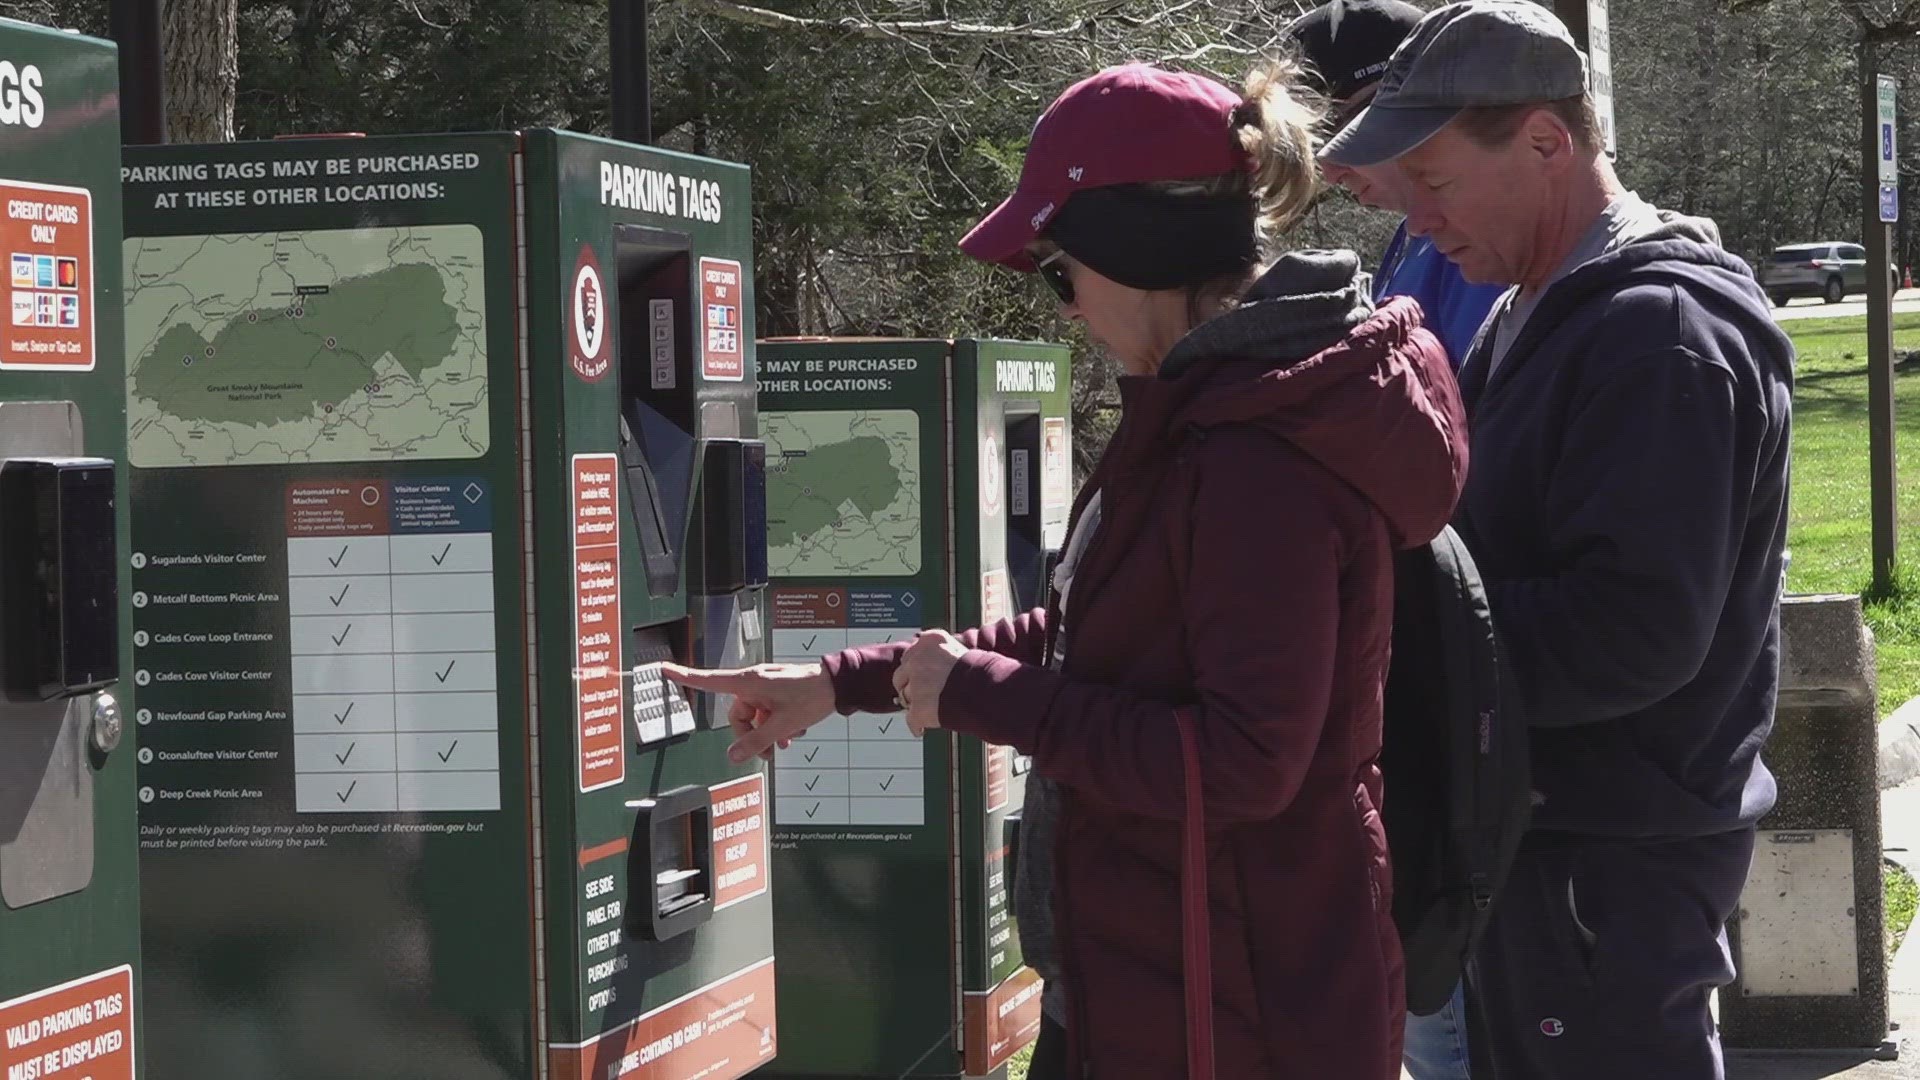 The park said its "Park it Forward" program and camping fees will support increased ranger presence, improved visitor experience and more.